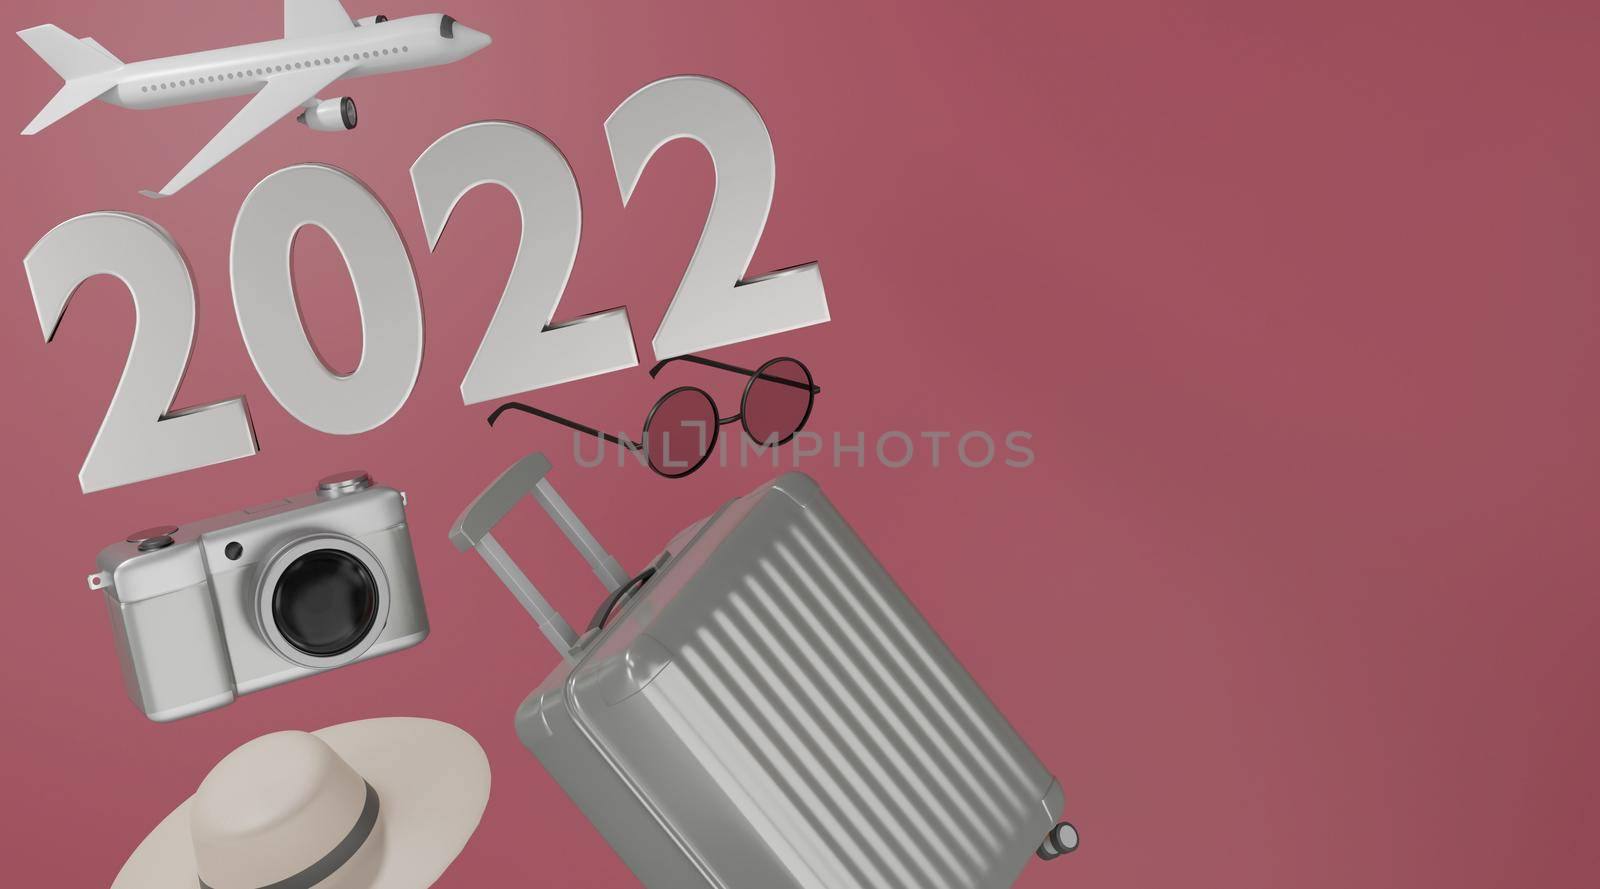 3d rendering. 2022 Traveling concept suitcase camera airplane hat and sunglasses on pink background.